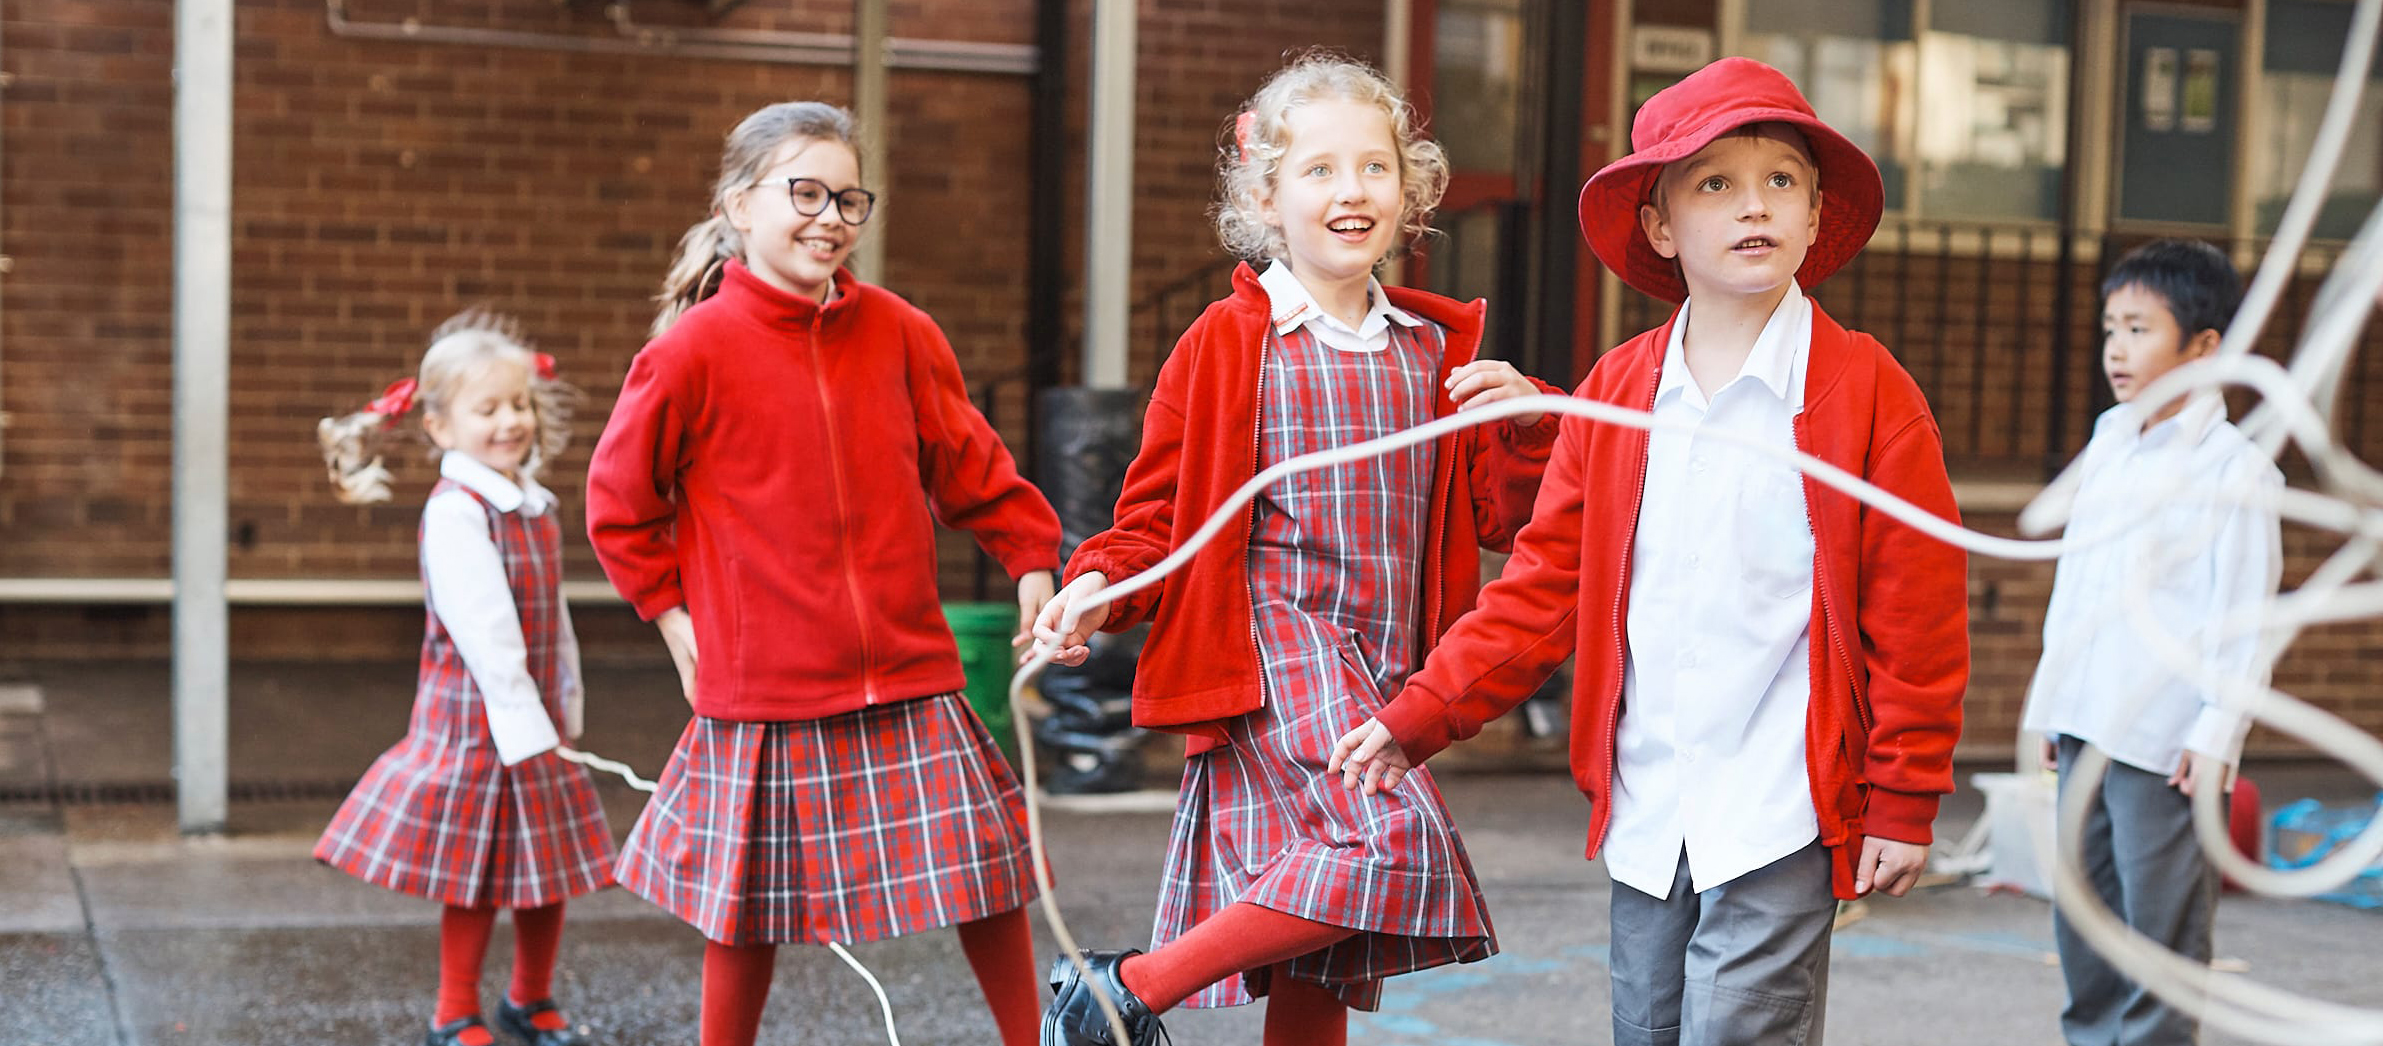 School Children Playing with Skipping Rope